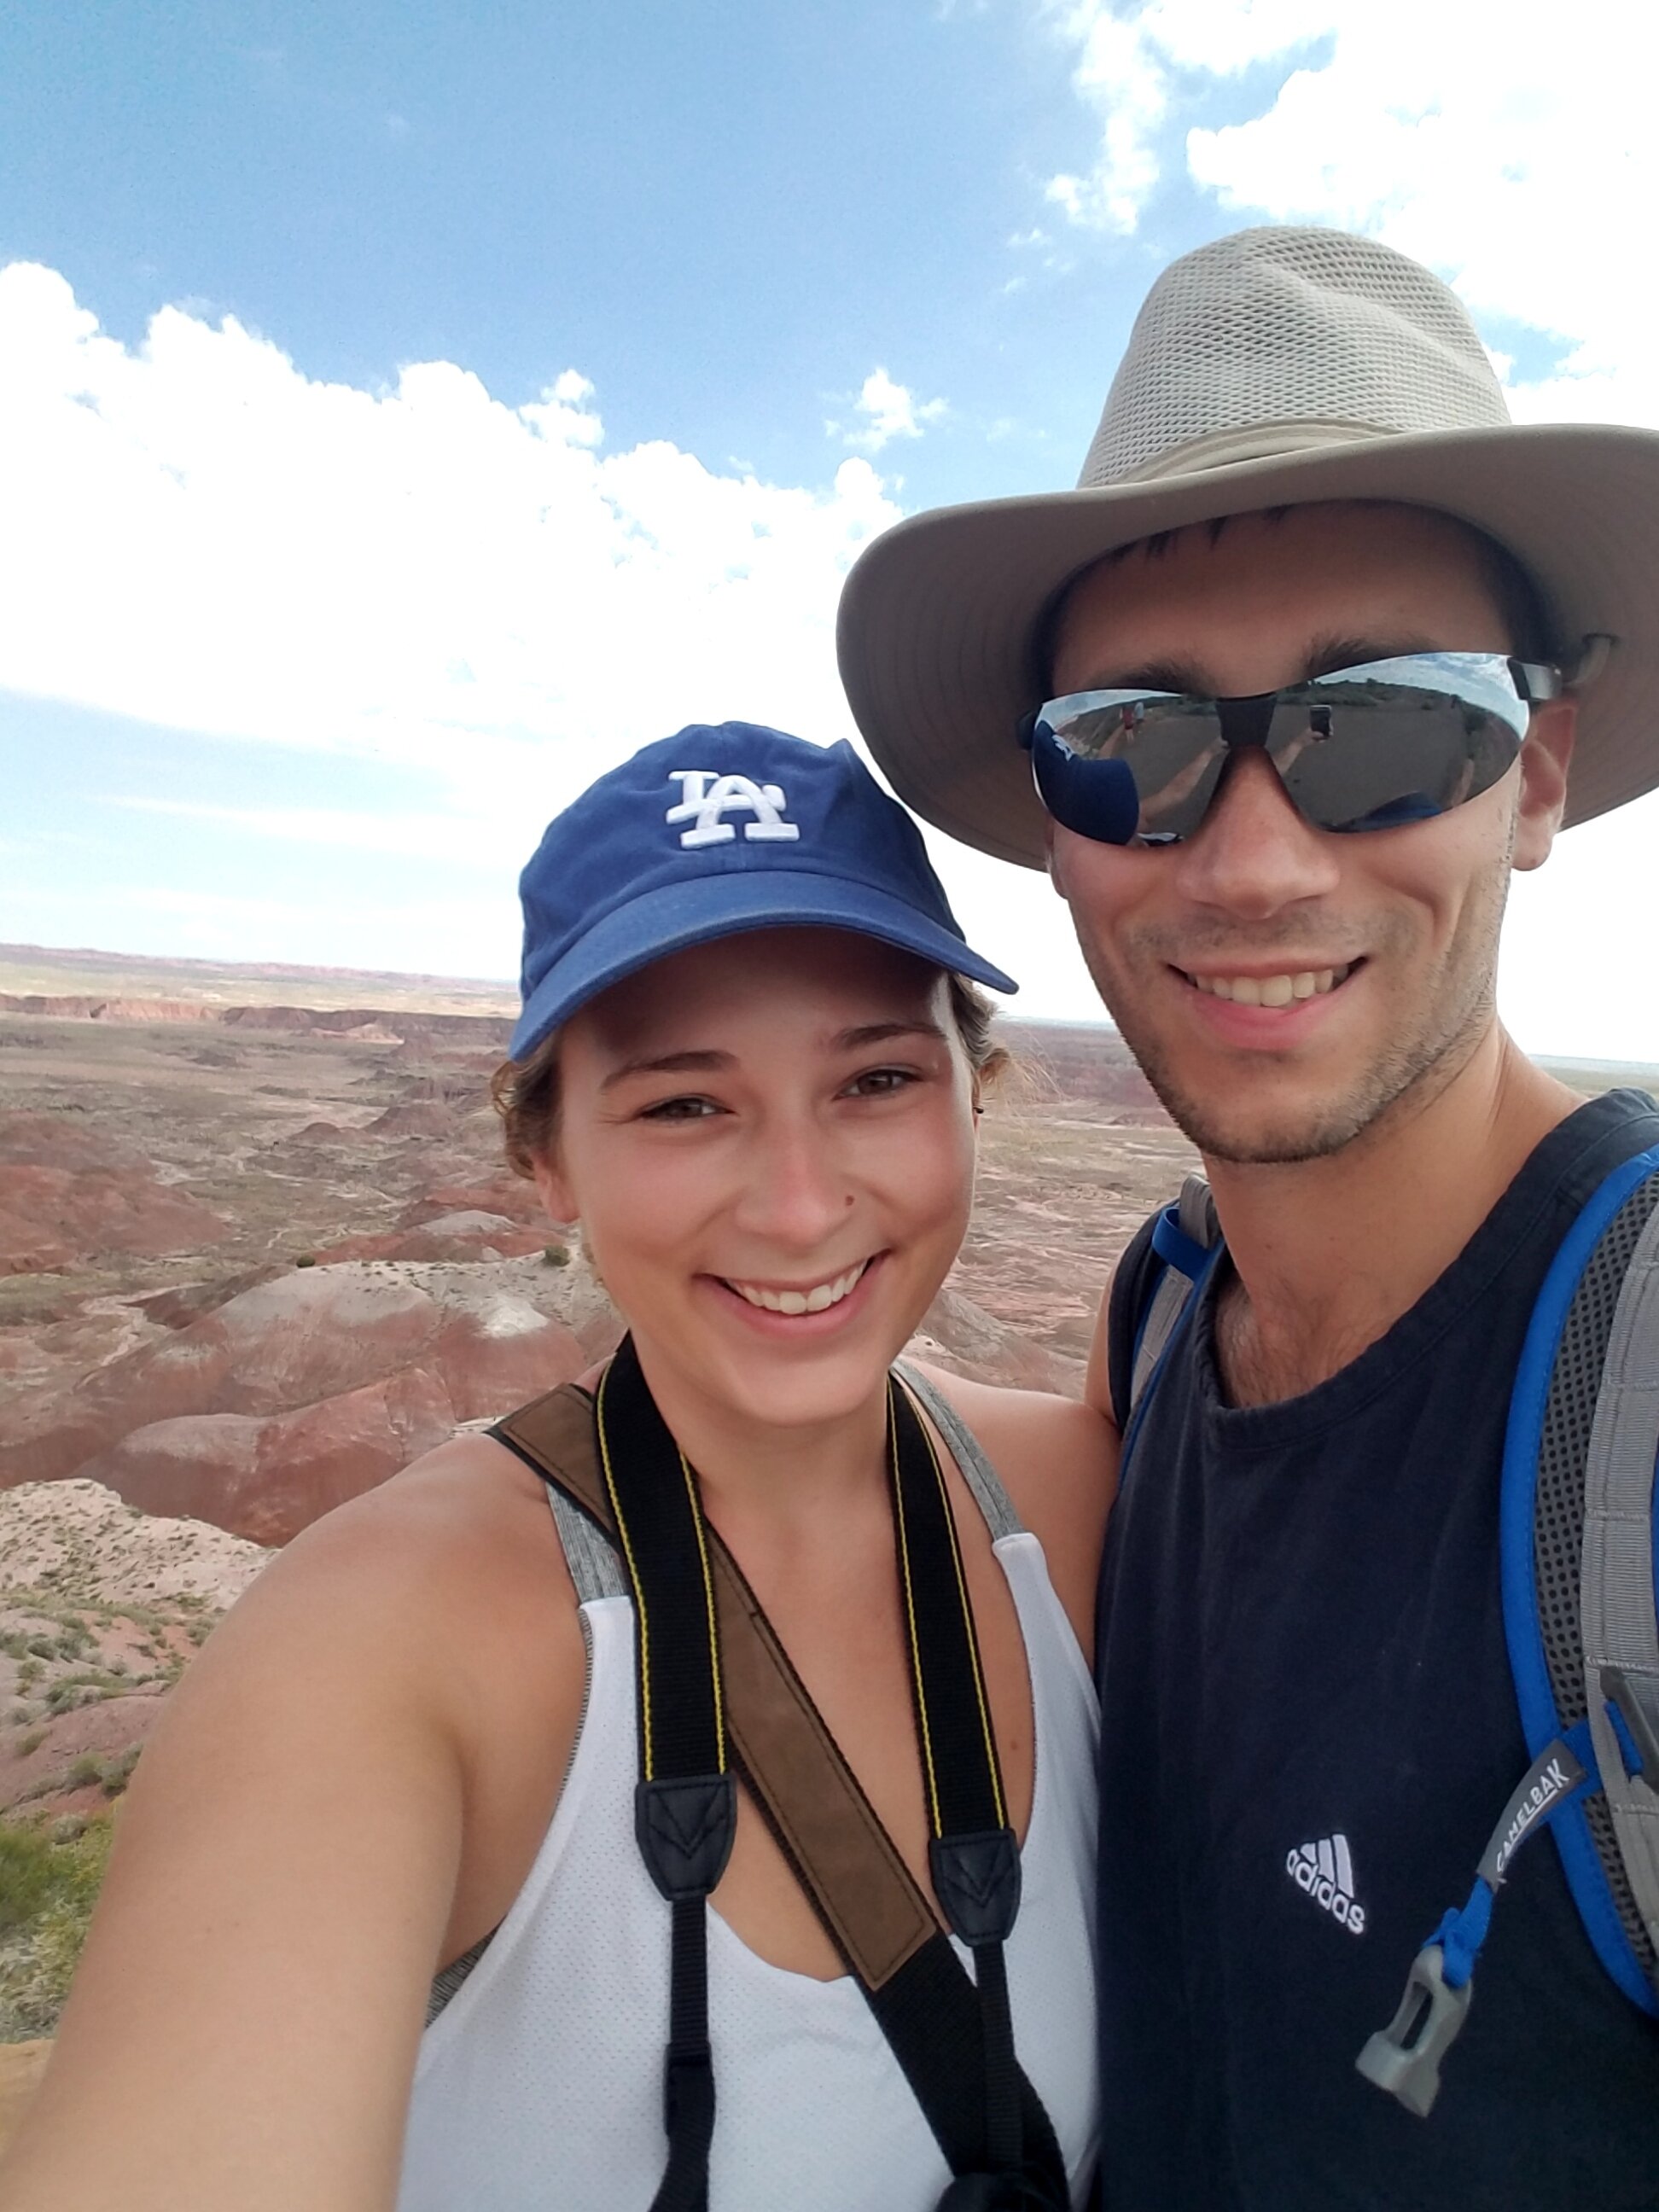 pitstop at the Petrified Forest + Painted Desert National Parks!